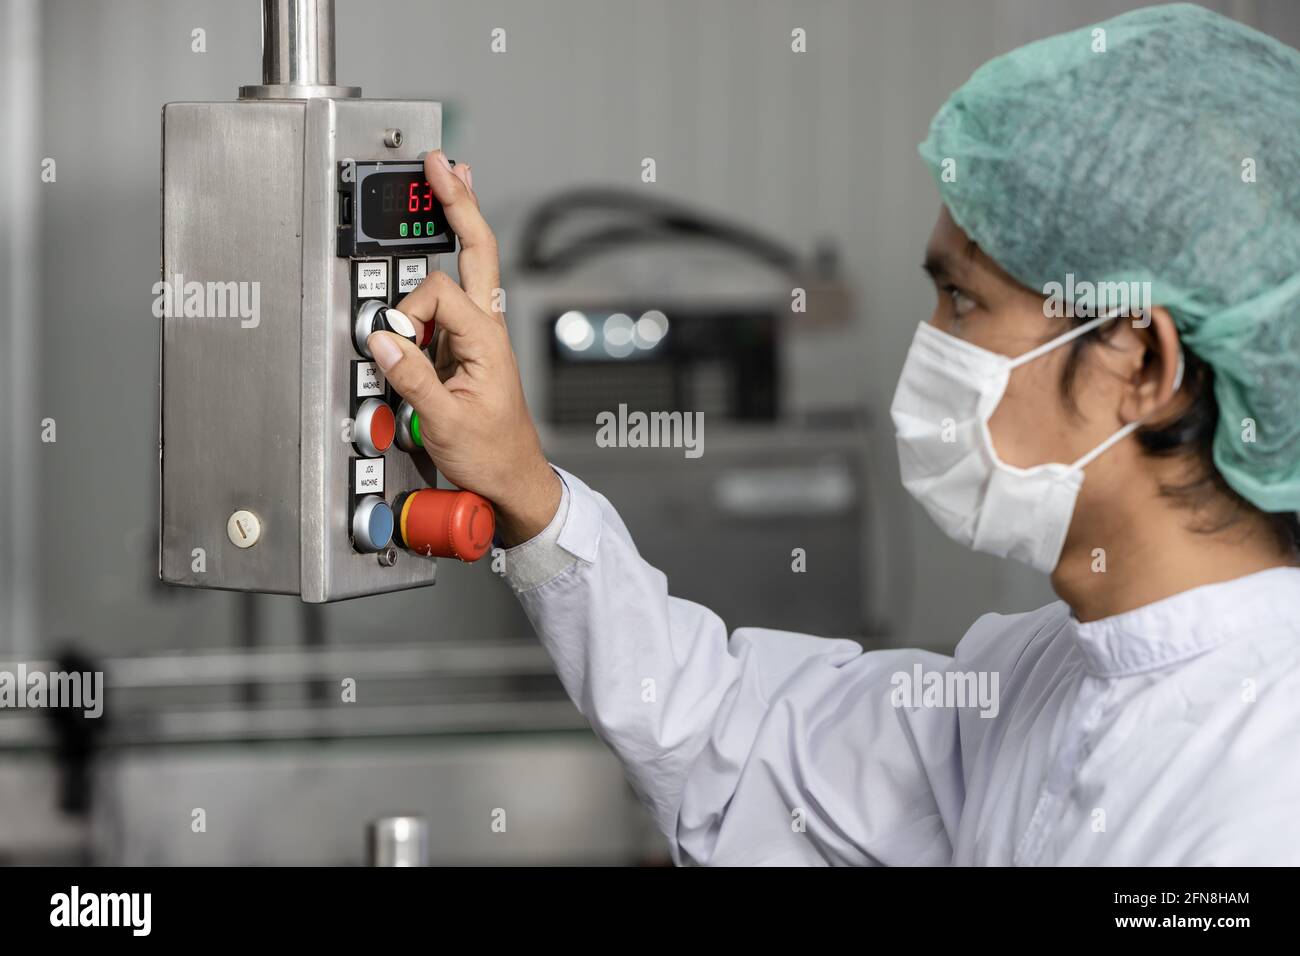 Staff workers working operate control machine in hygiene food factory. Stock Photo